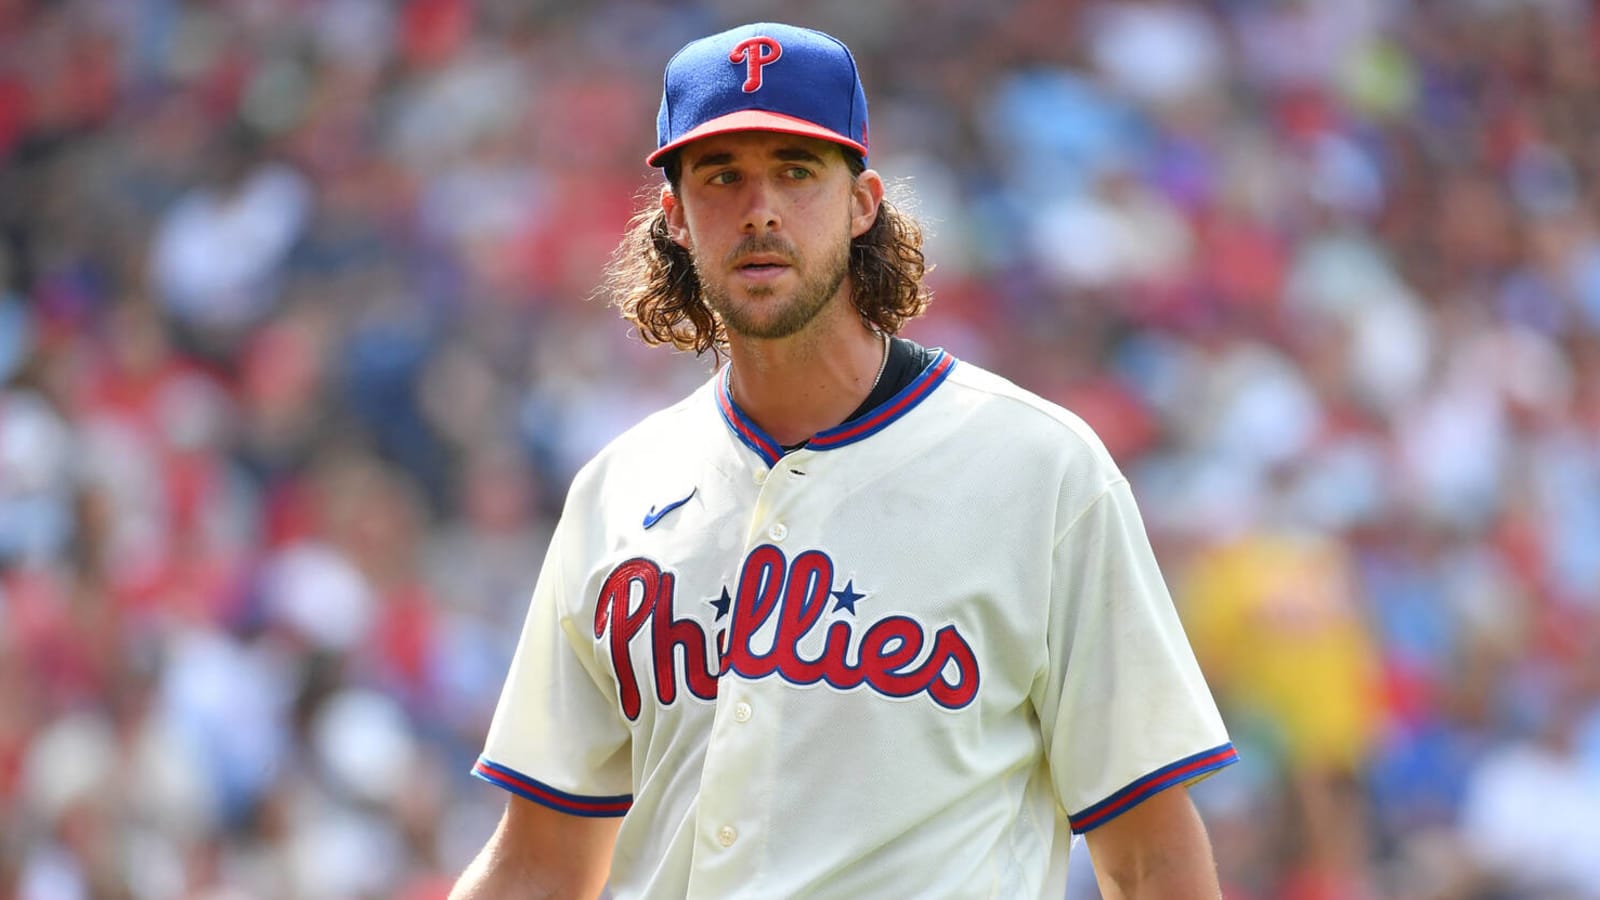 Phillies ace comments on massive contract extension